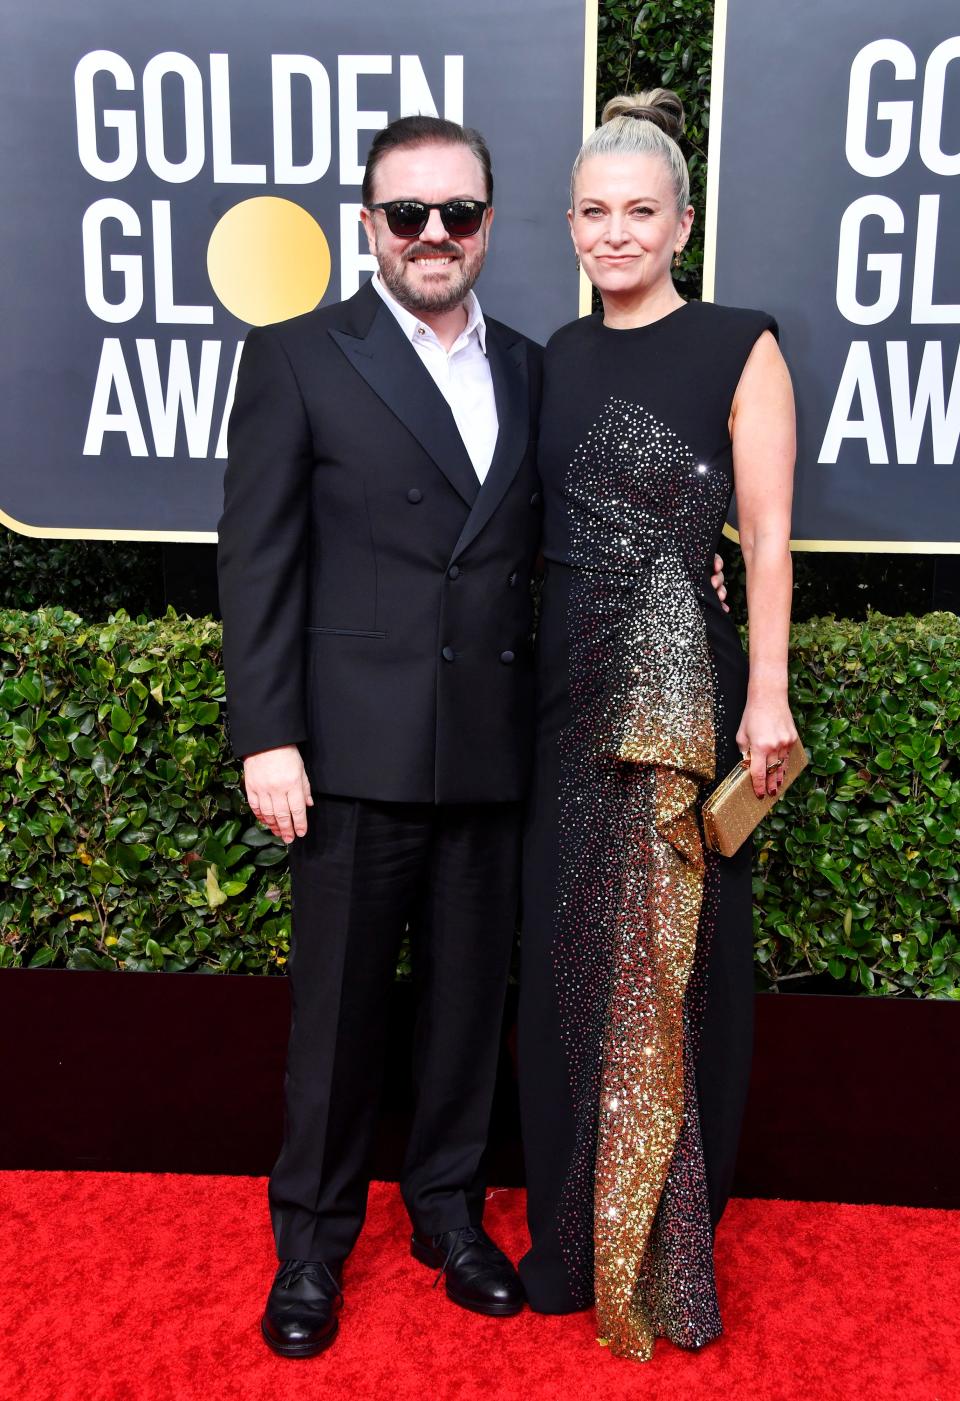 Ricky Gervais and Jane Fallon golden globes